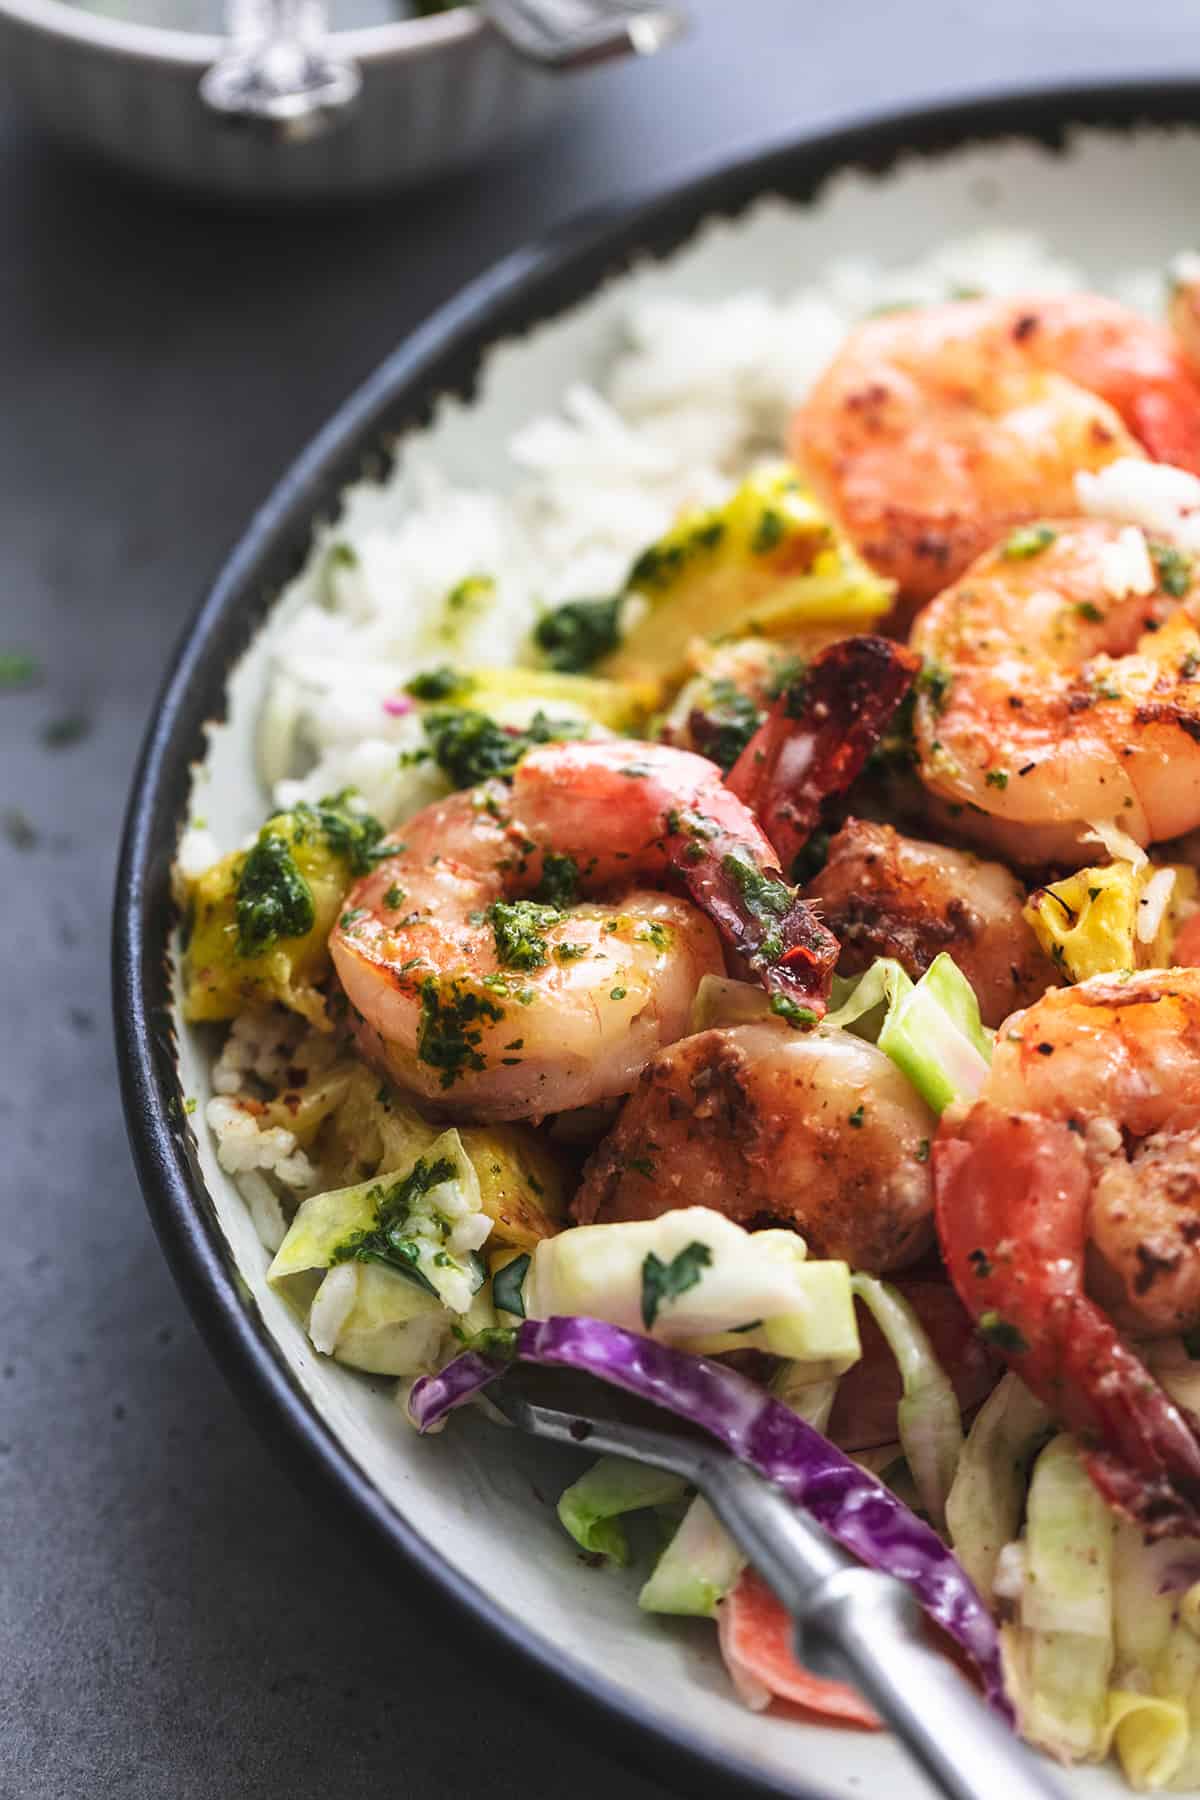 up close view of grilled shrimp with slaw and herb sauce